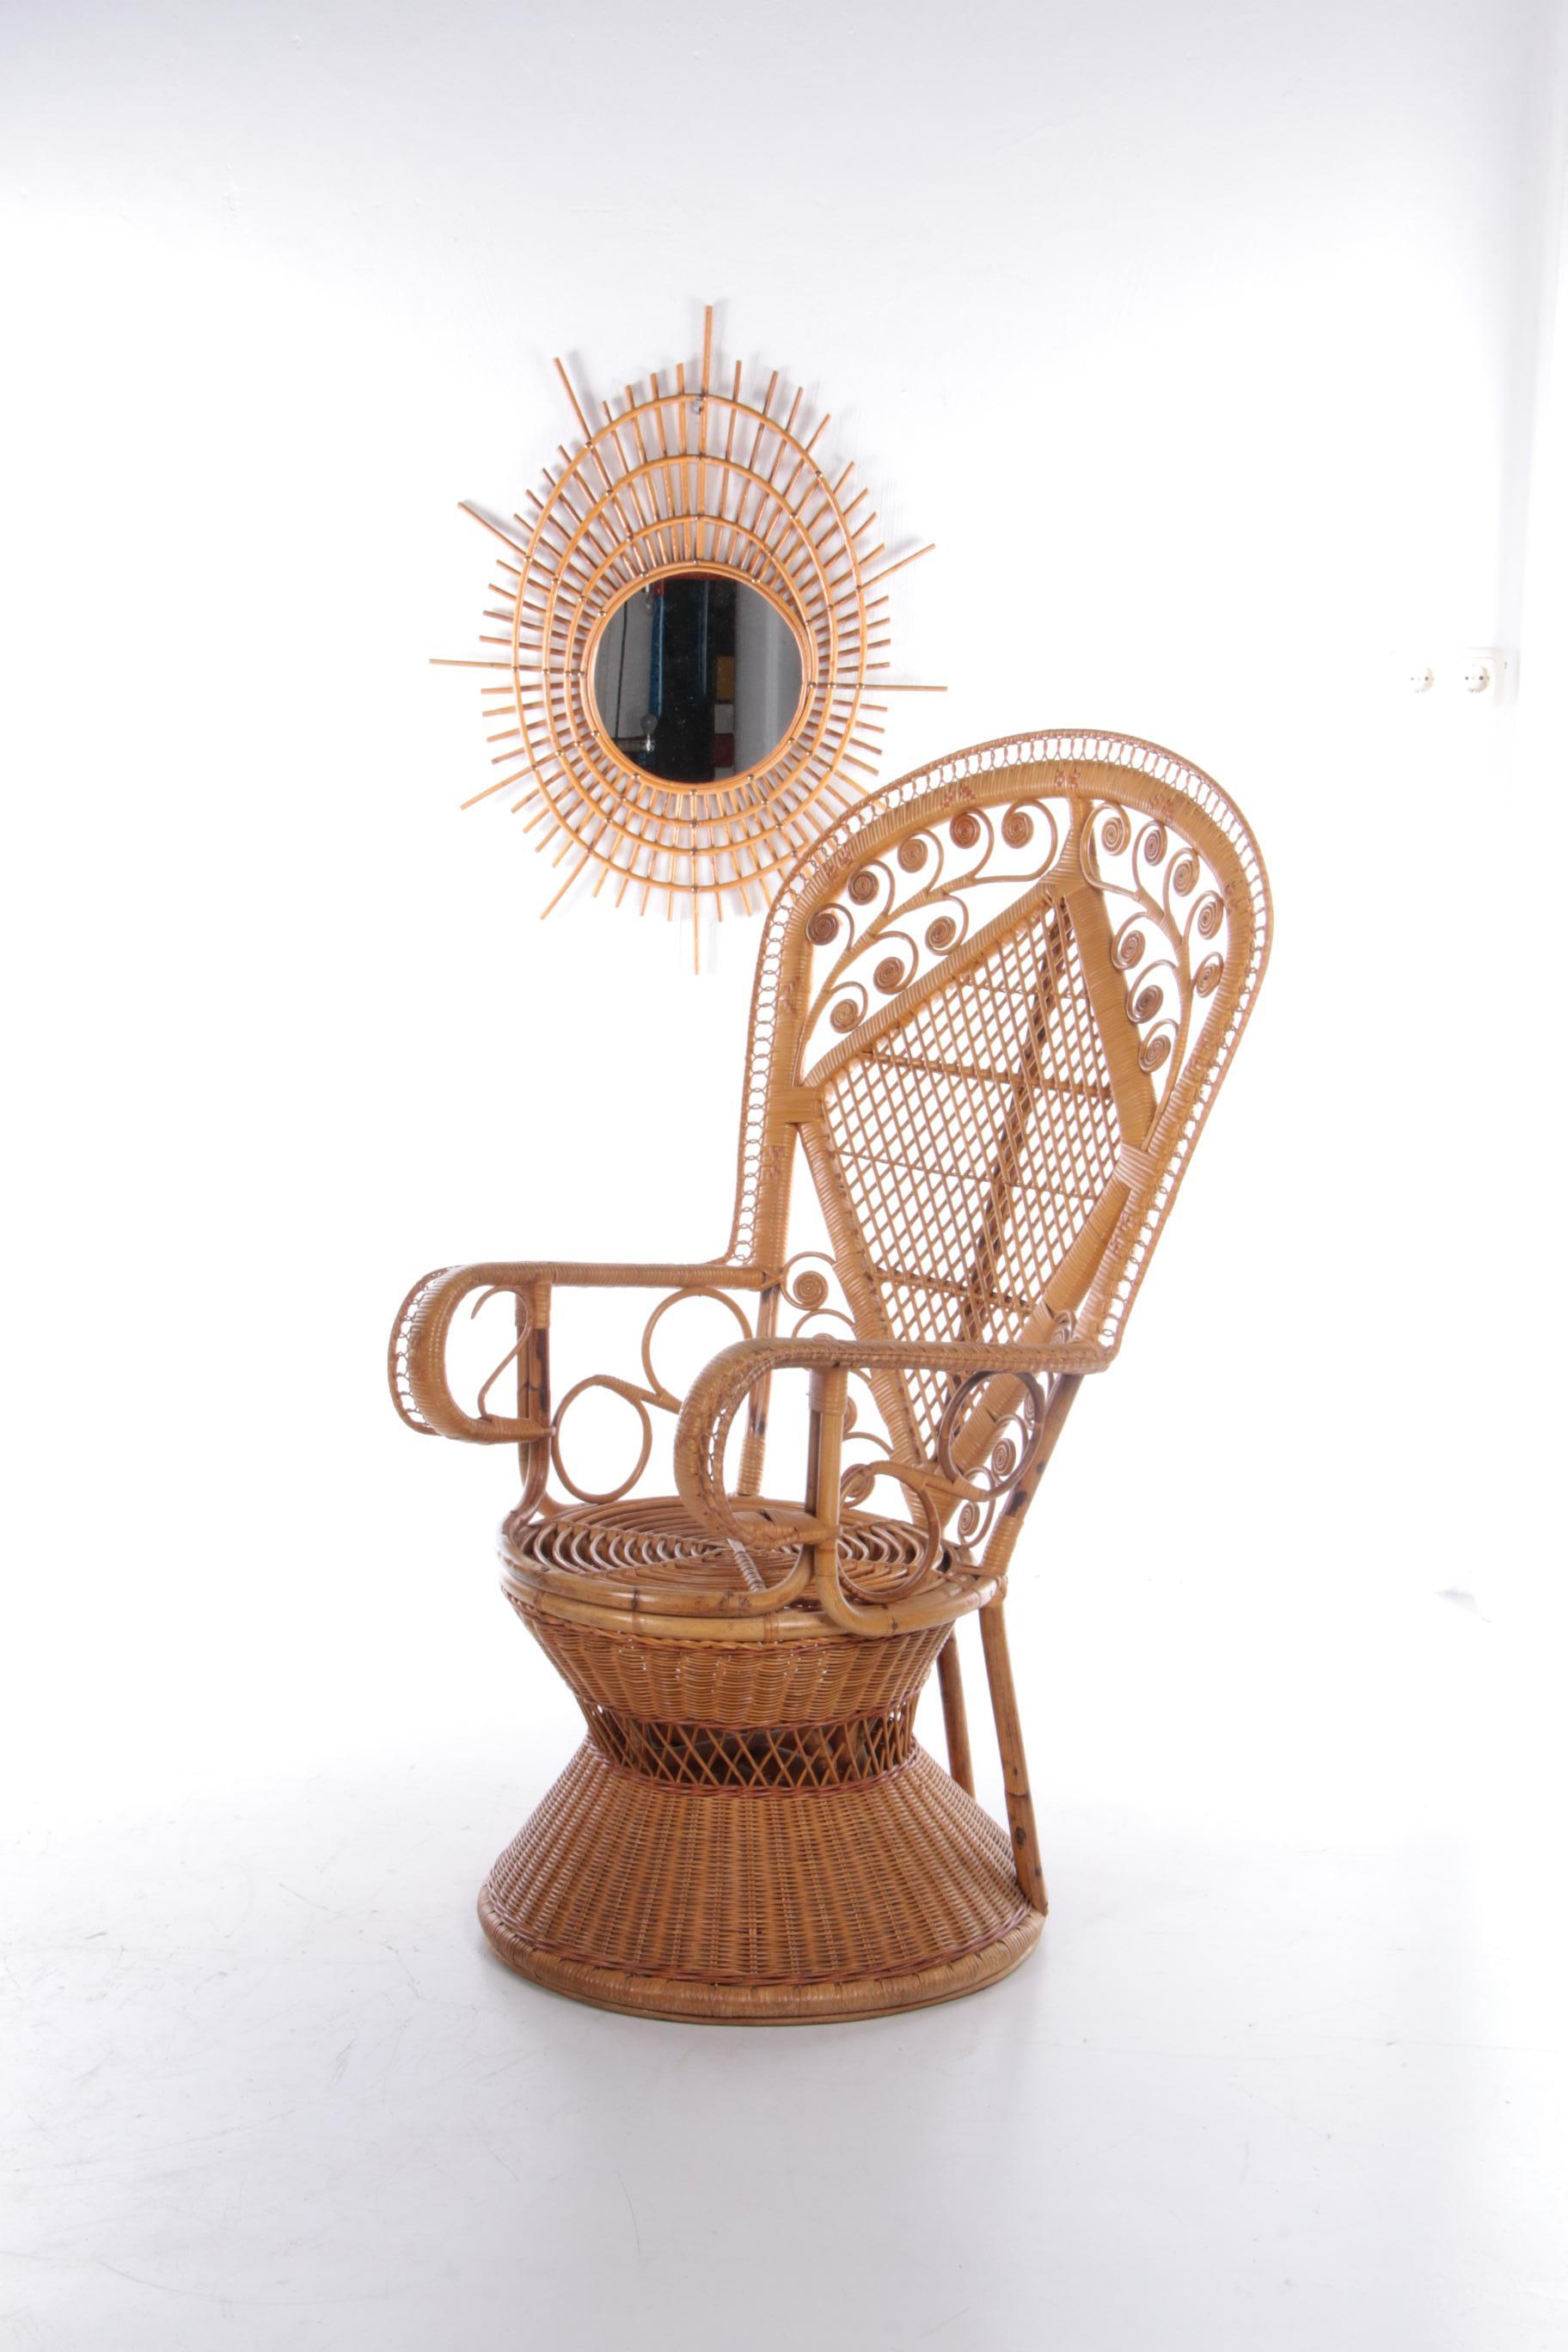 Vintage large bamboo chair 1960s France.


The world famous Emmanuelle peacock chair. The chair was produced around the 1960s in France and is a real household name within the design world and beyond.

The peacock chair got its fame through an